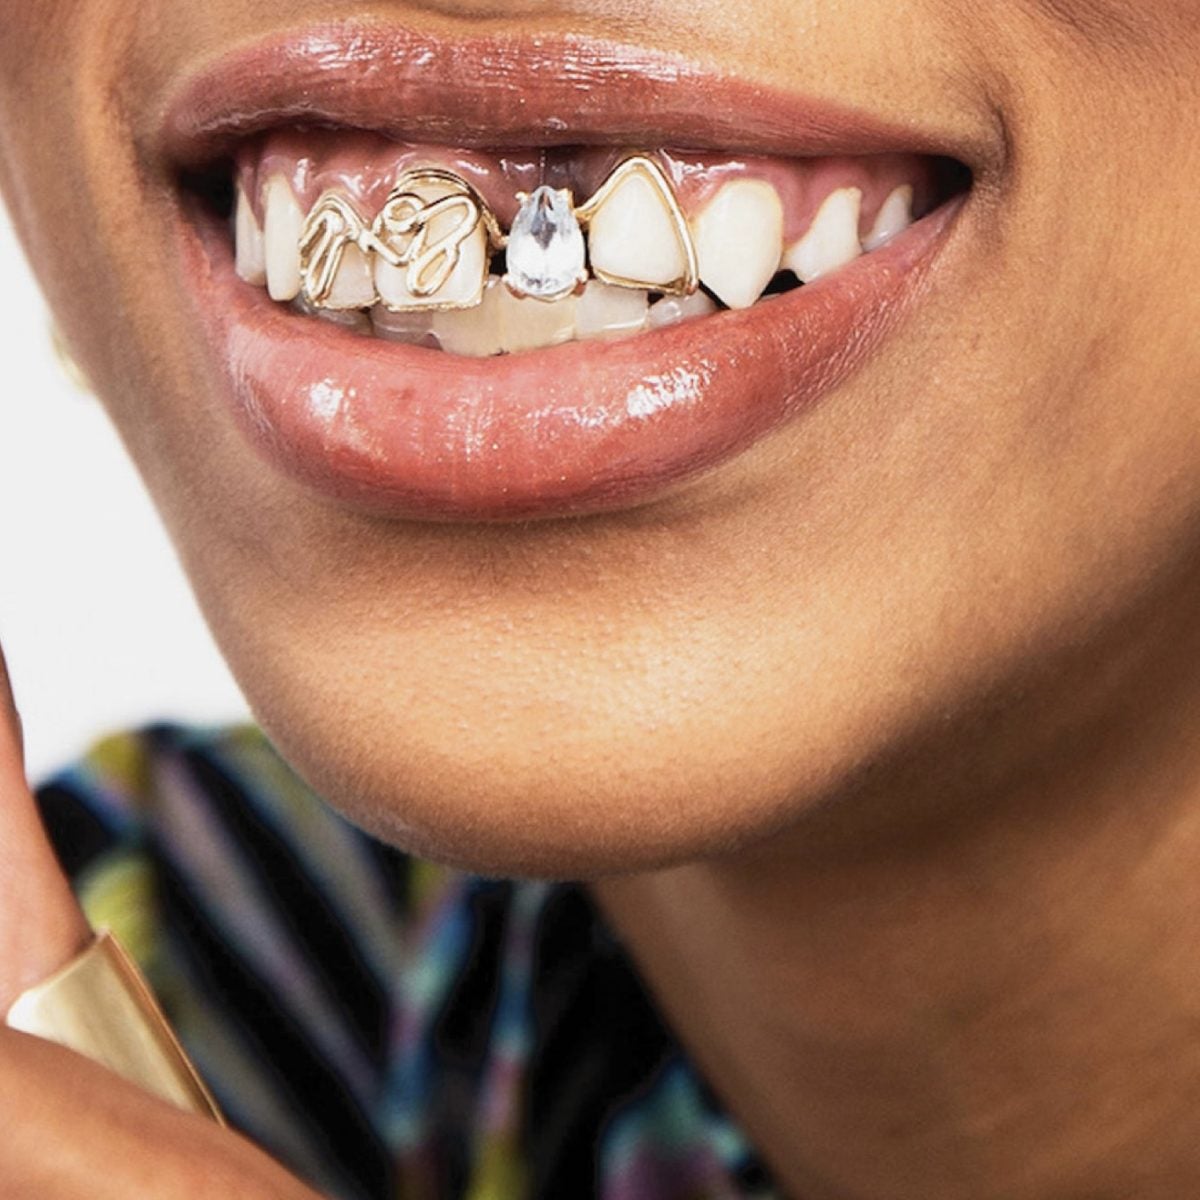 Aziza Handcrafted's Custom Grillz Are Giving Us Another Reason To Smile